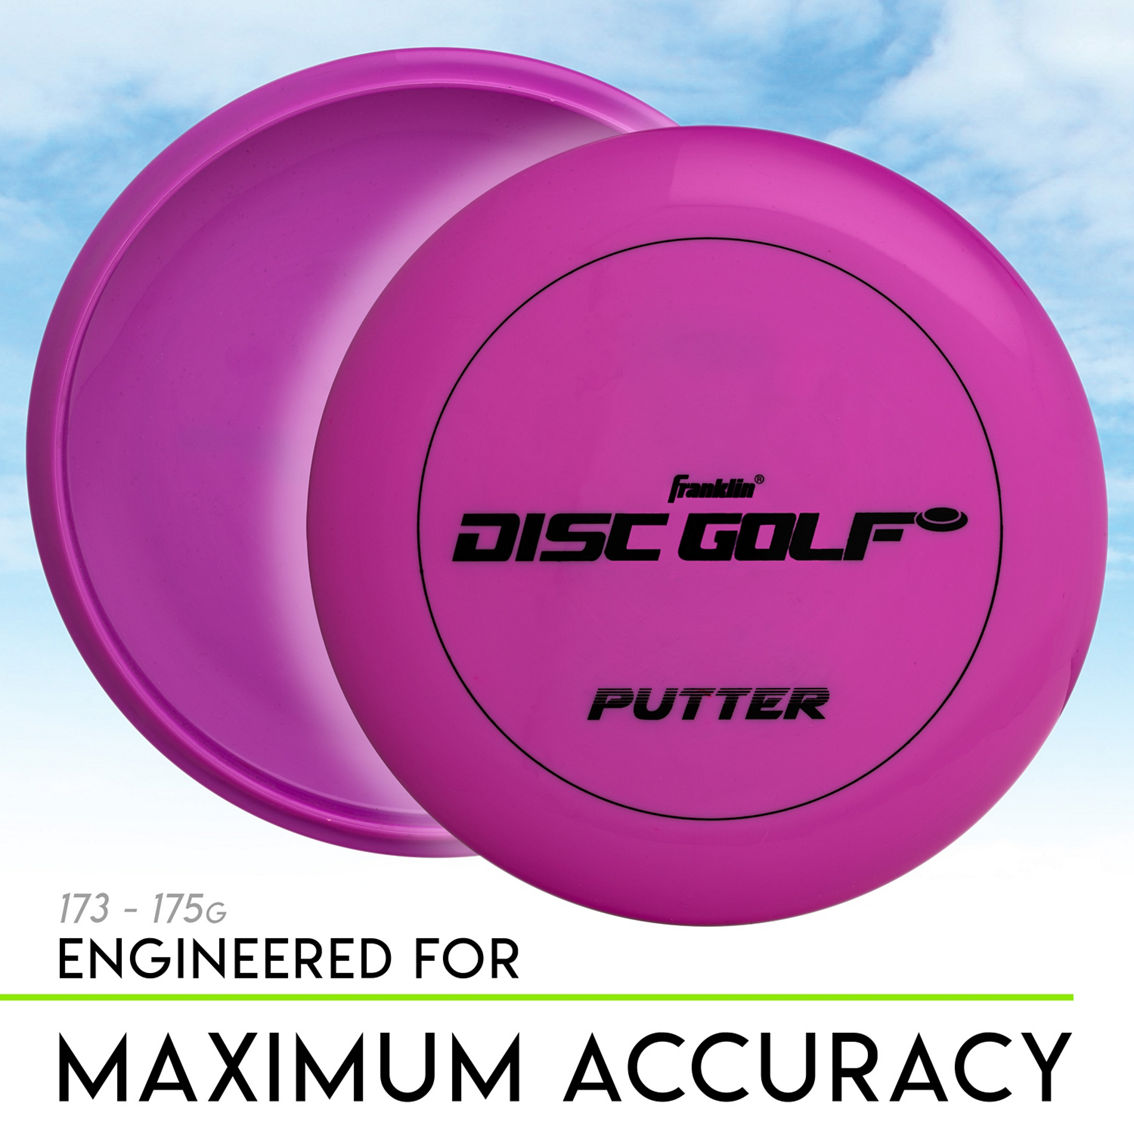 Franklin Disc Golf 3 pc. Set with Putter, Mid Range and Driver Discs - Image 5 of 9